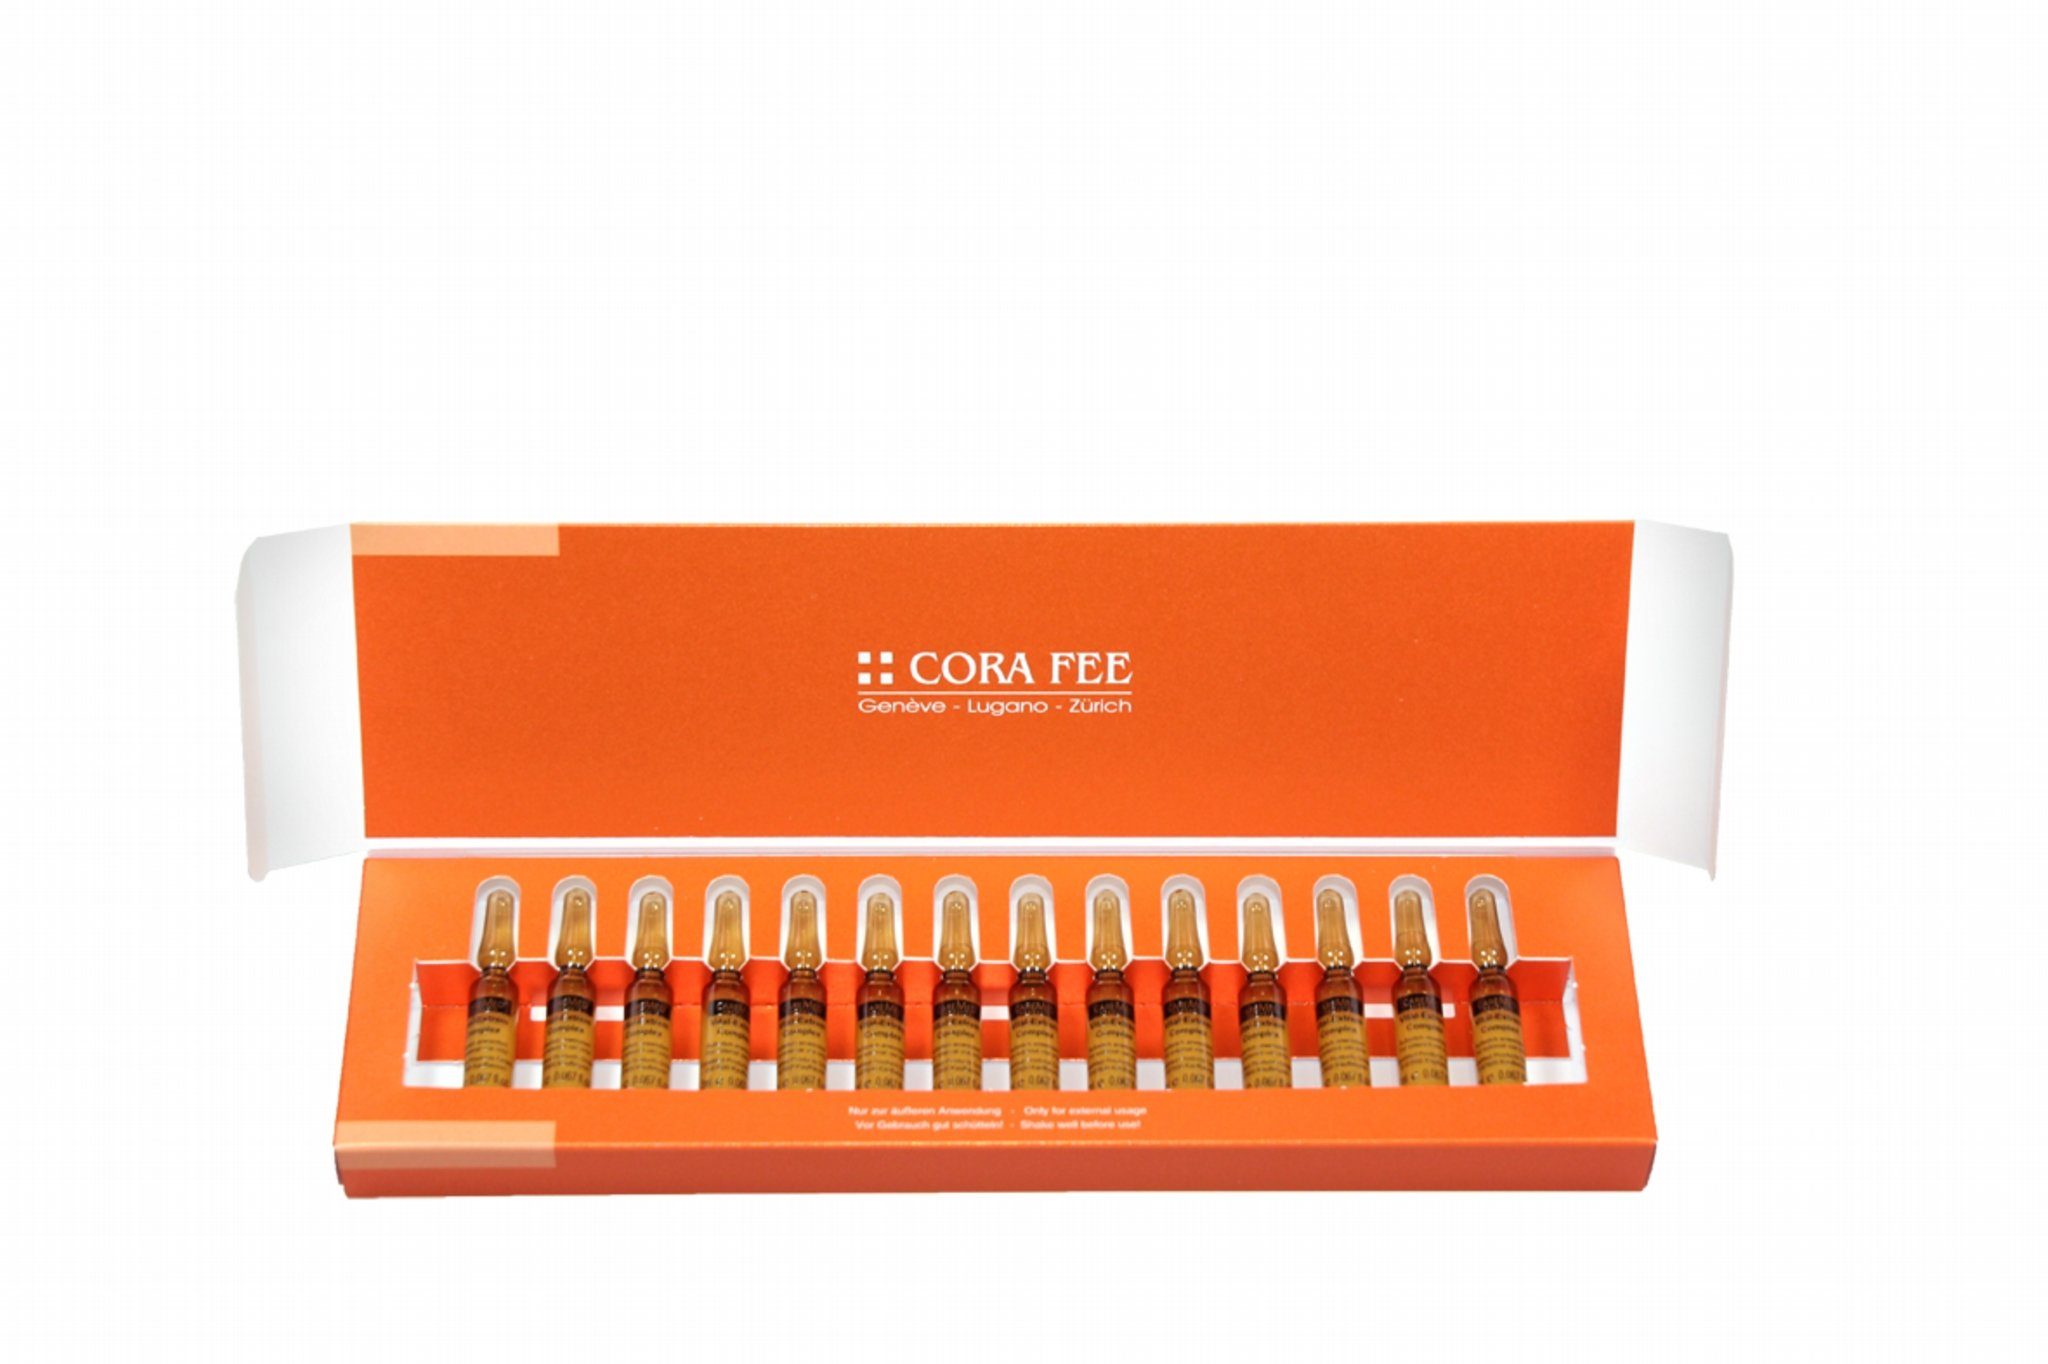 CORA FEE Tagescreme Vital-Extrem Complex 14 x 2 ml-Ampoule | Tagescremes